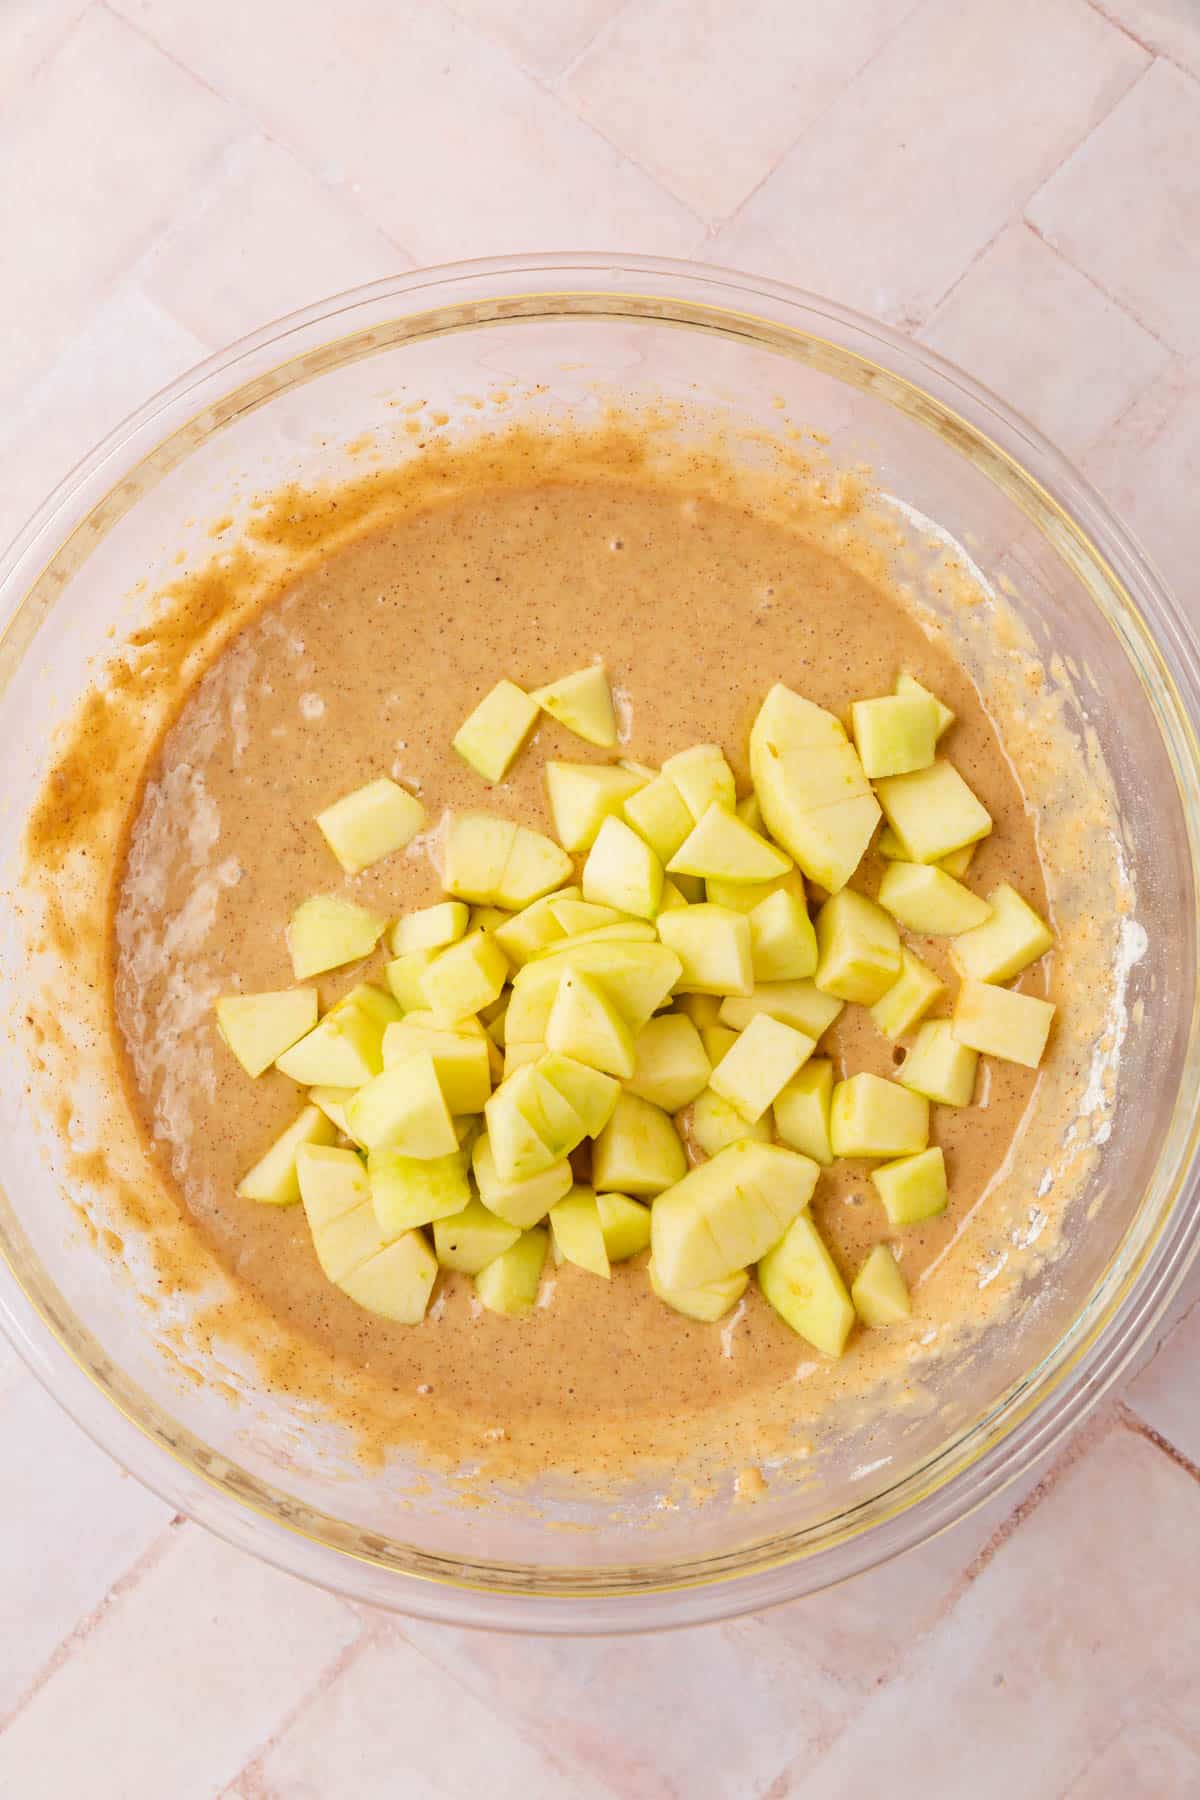 A glass mixing bowl with gluten-free spiced cake batter topped with diced apples in it.